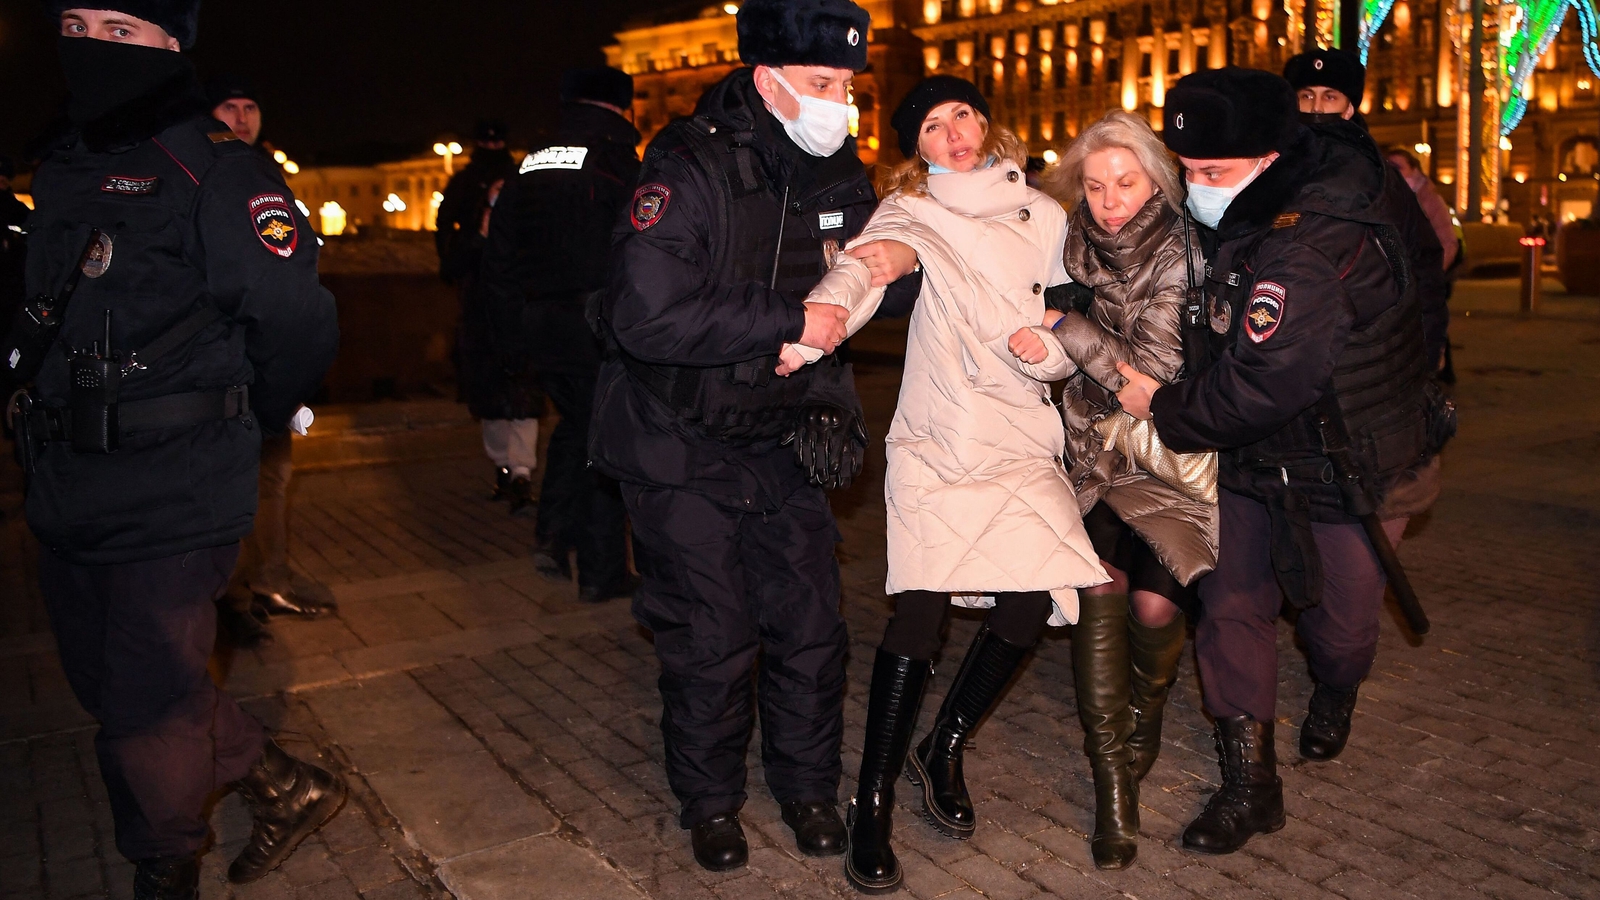 Image - Police officers detain women during a protest against Russia's invasion of Ukraine in central Moscow